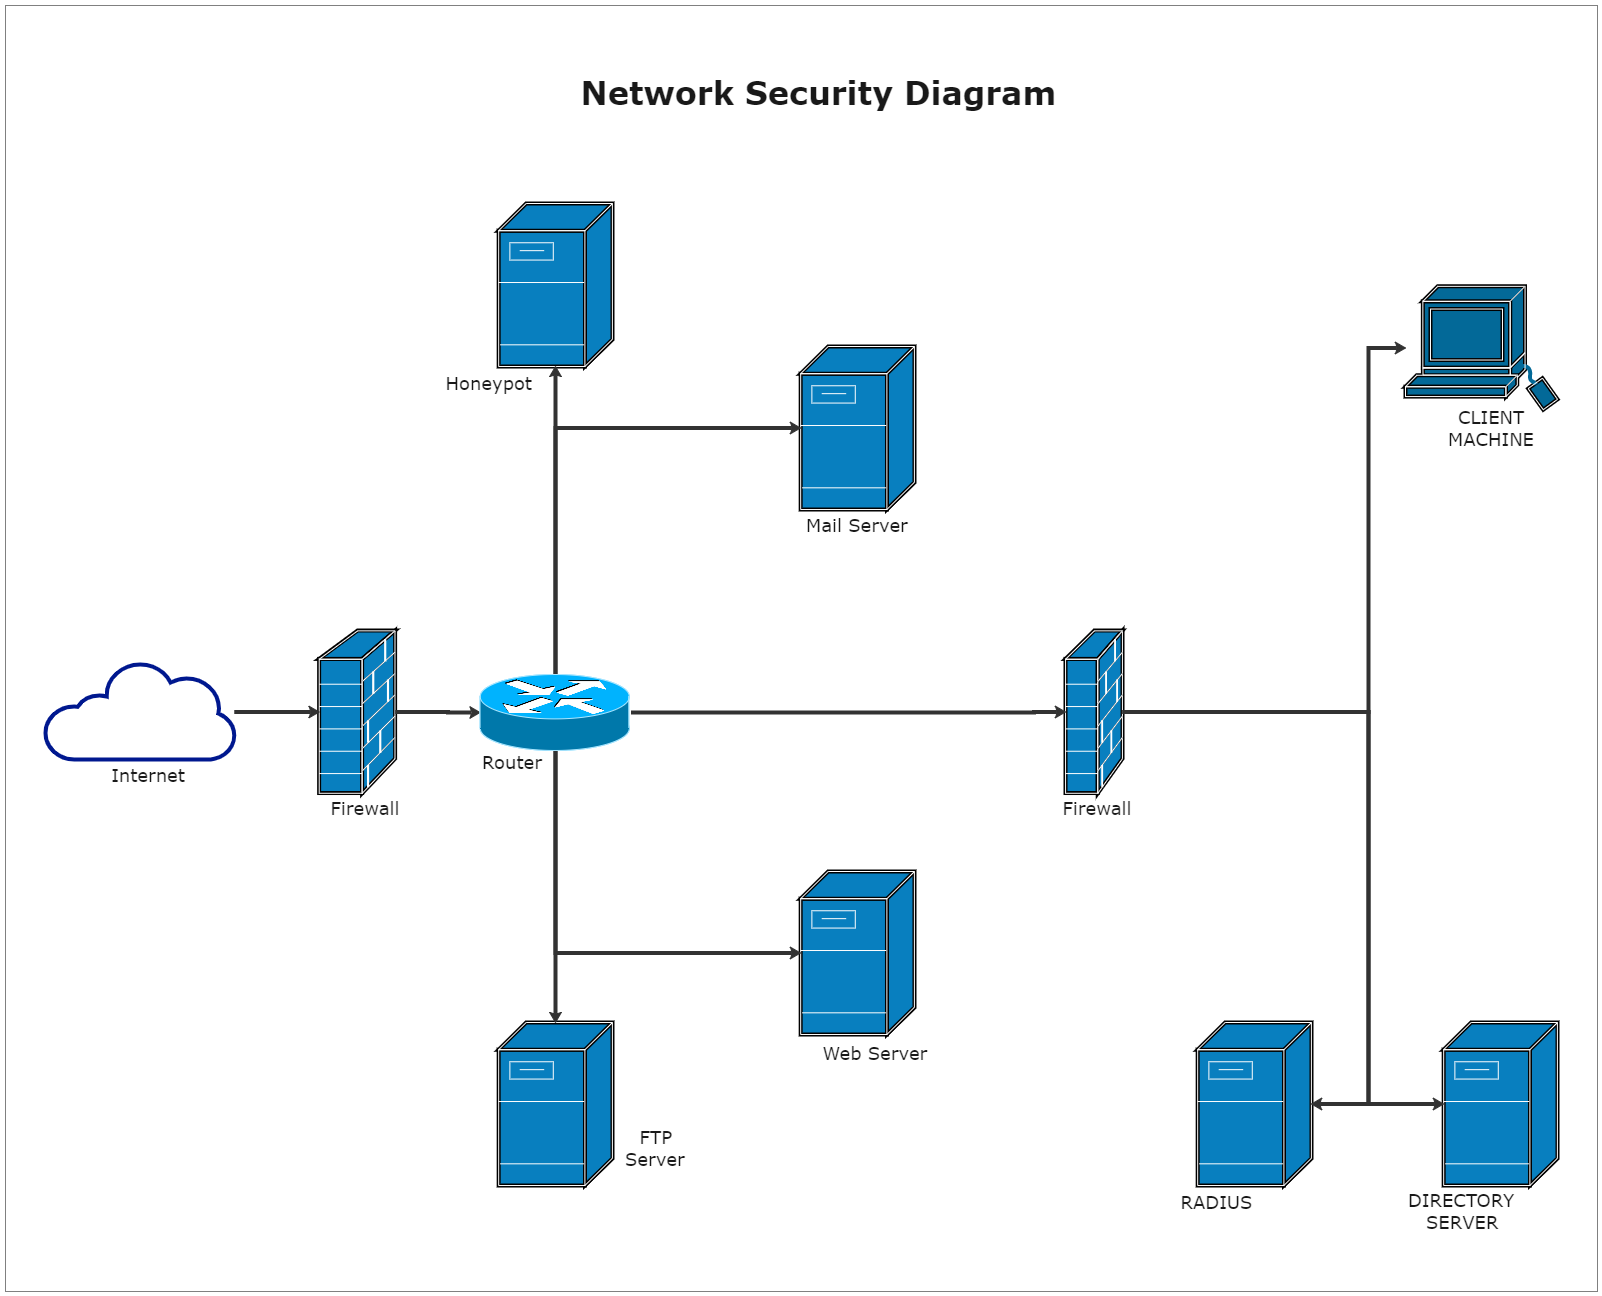 A network security diagram is a way to ensure the complete protection of information and assets in a given system. A network security diagram enables the security of data transmitted and stored. Network security is the collection of measures taken to prev